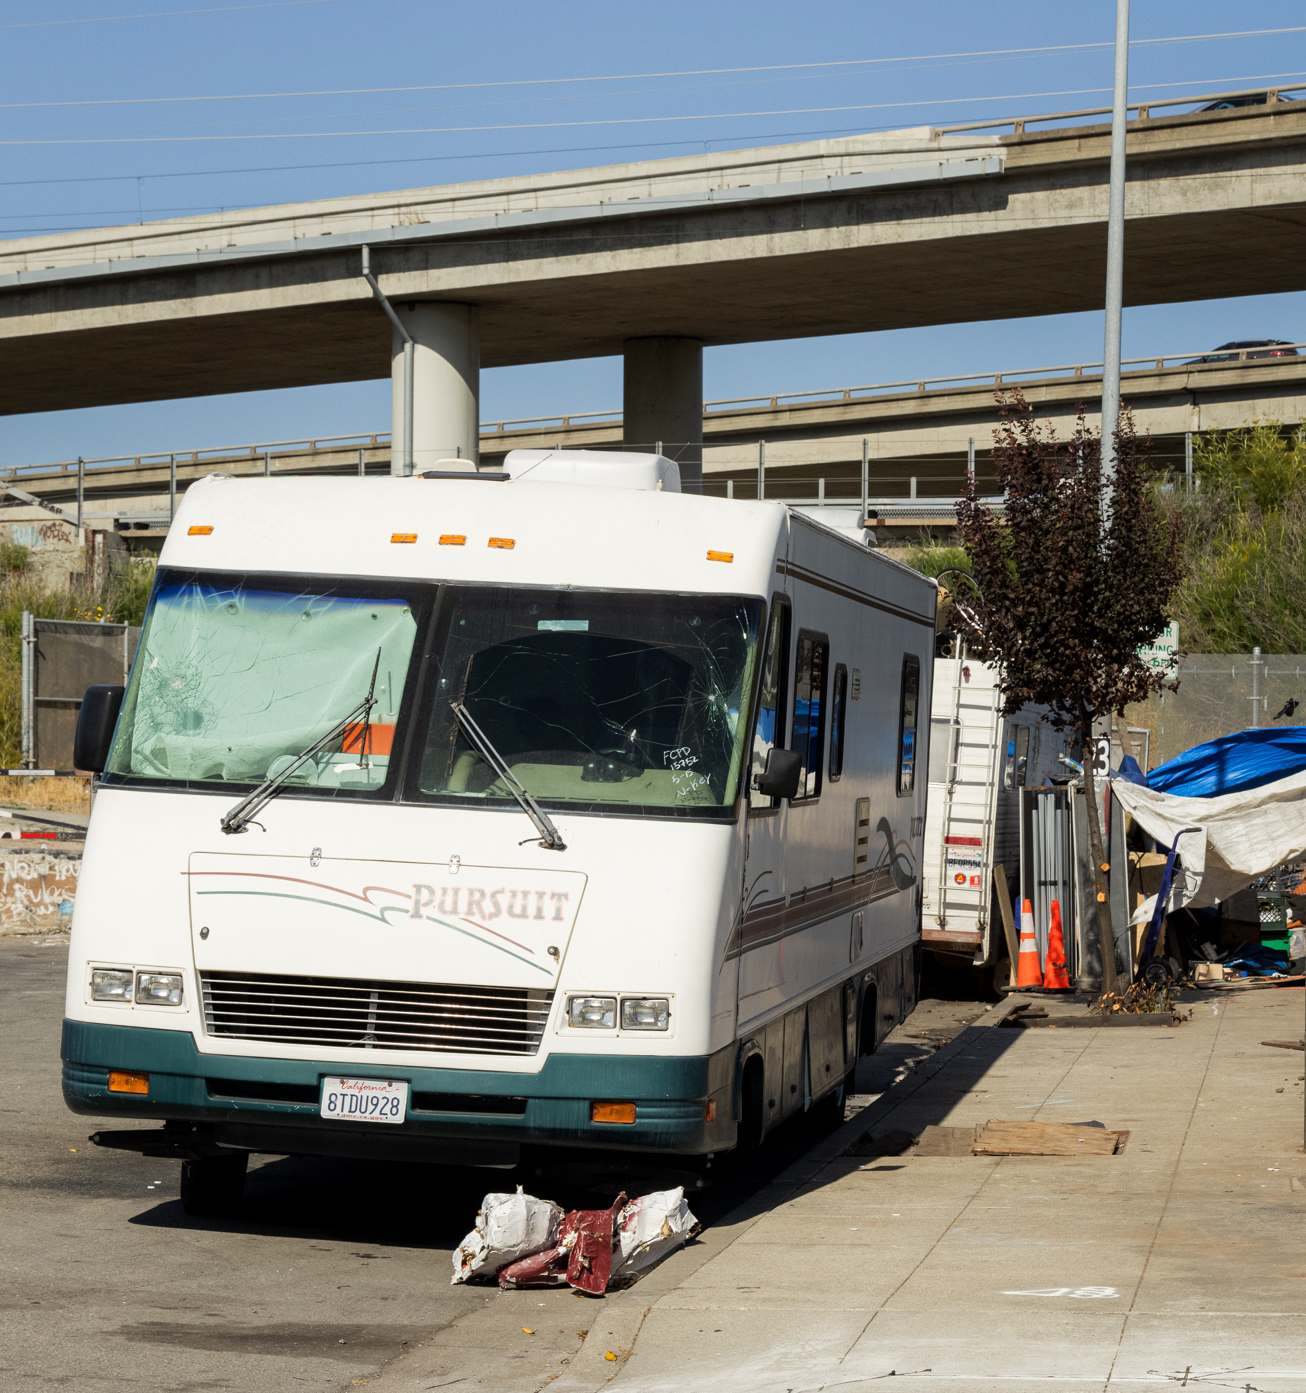 A white RV with &quot;Pursuit&quot; written on it is parked on the street near an overpass, surrounded by some debris and makeshift shelter materials.